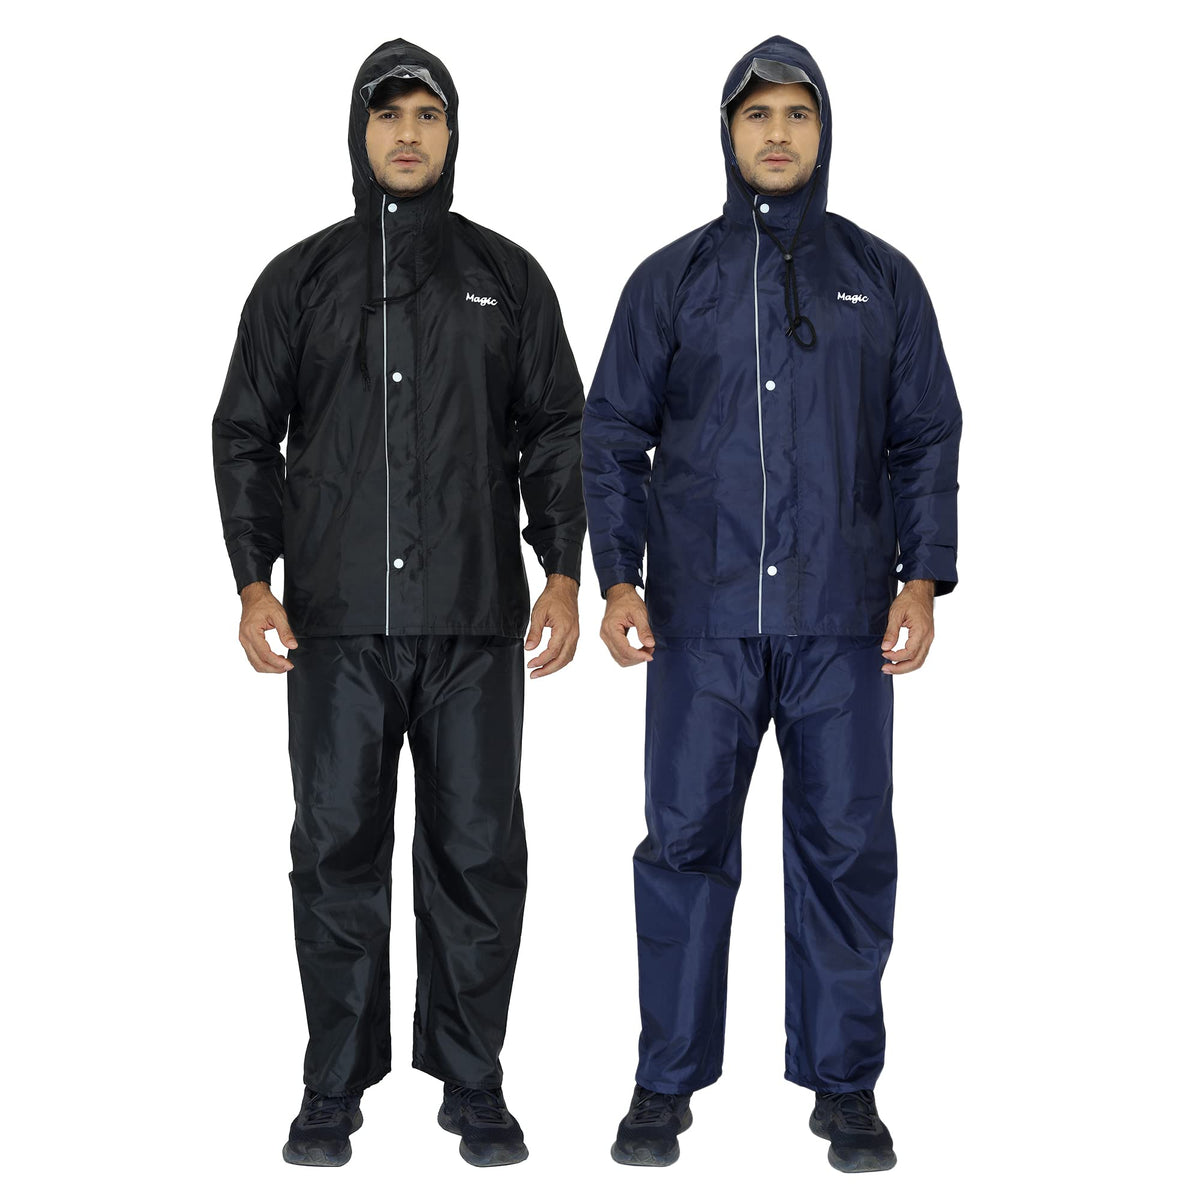 THE CLOWNFISH Combo Of 2 Rain Coats for Men Waterproof for Bike Reversible Double Layer with Hood Raincoat for Men. Set of Top and Bottom Packed in a Storage Bag Magic Series -Black, Blue (X-Large)